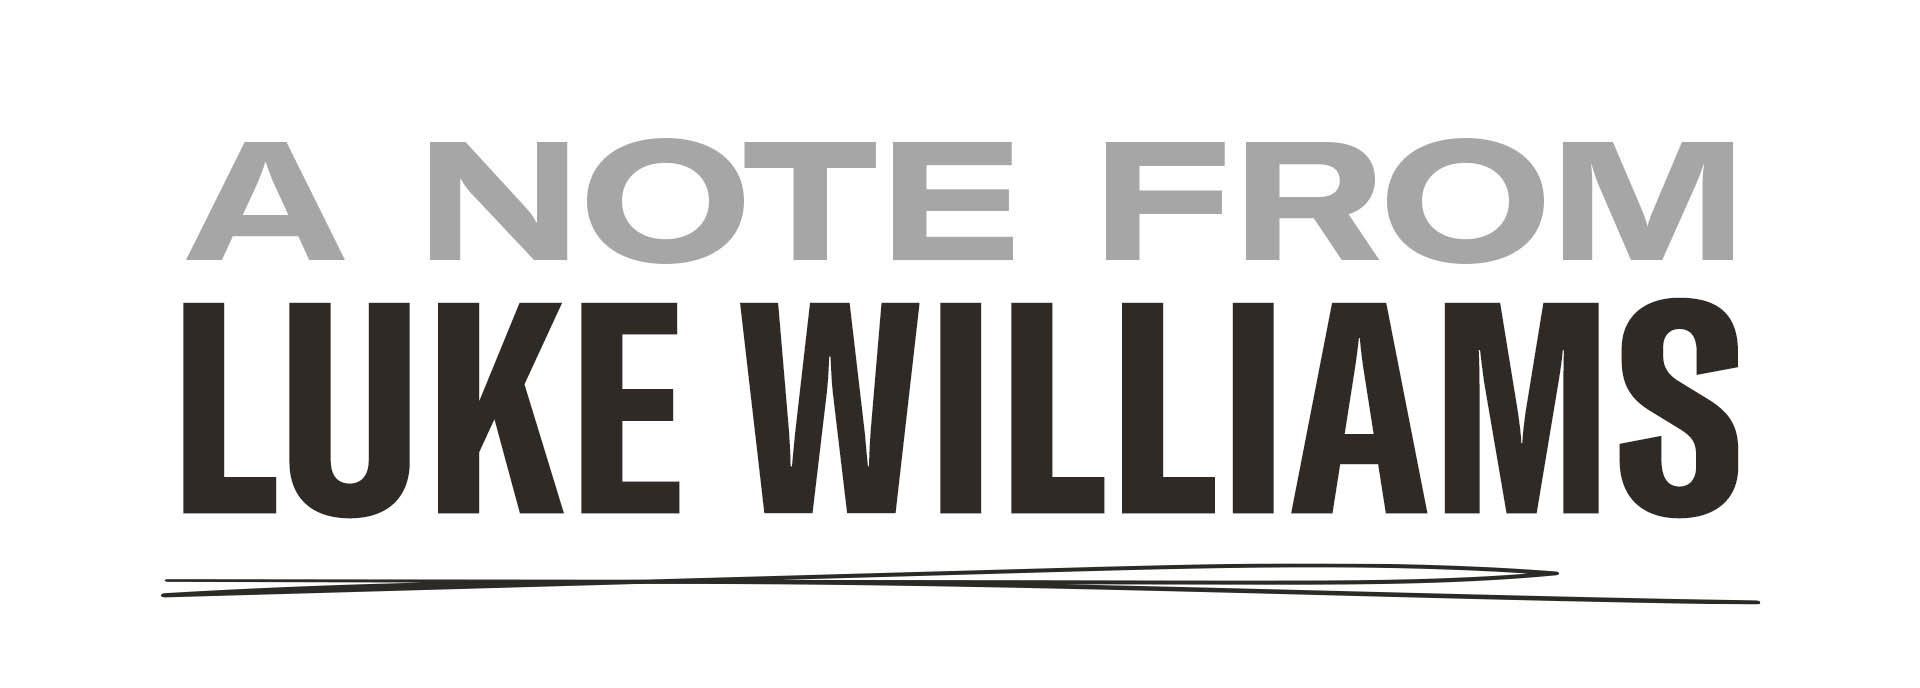 A note from Luke Williams